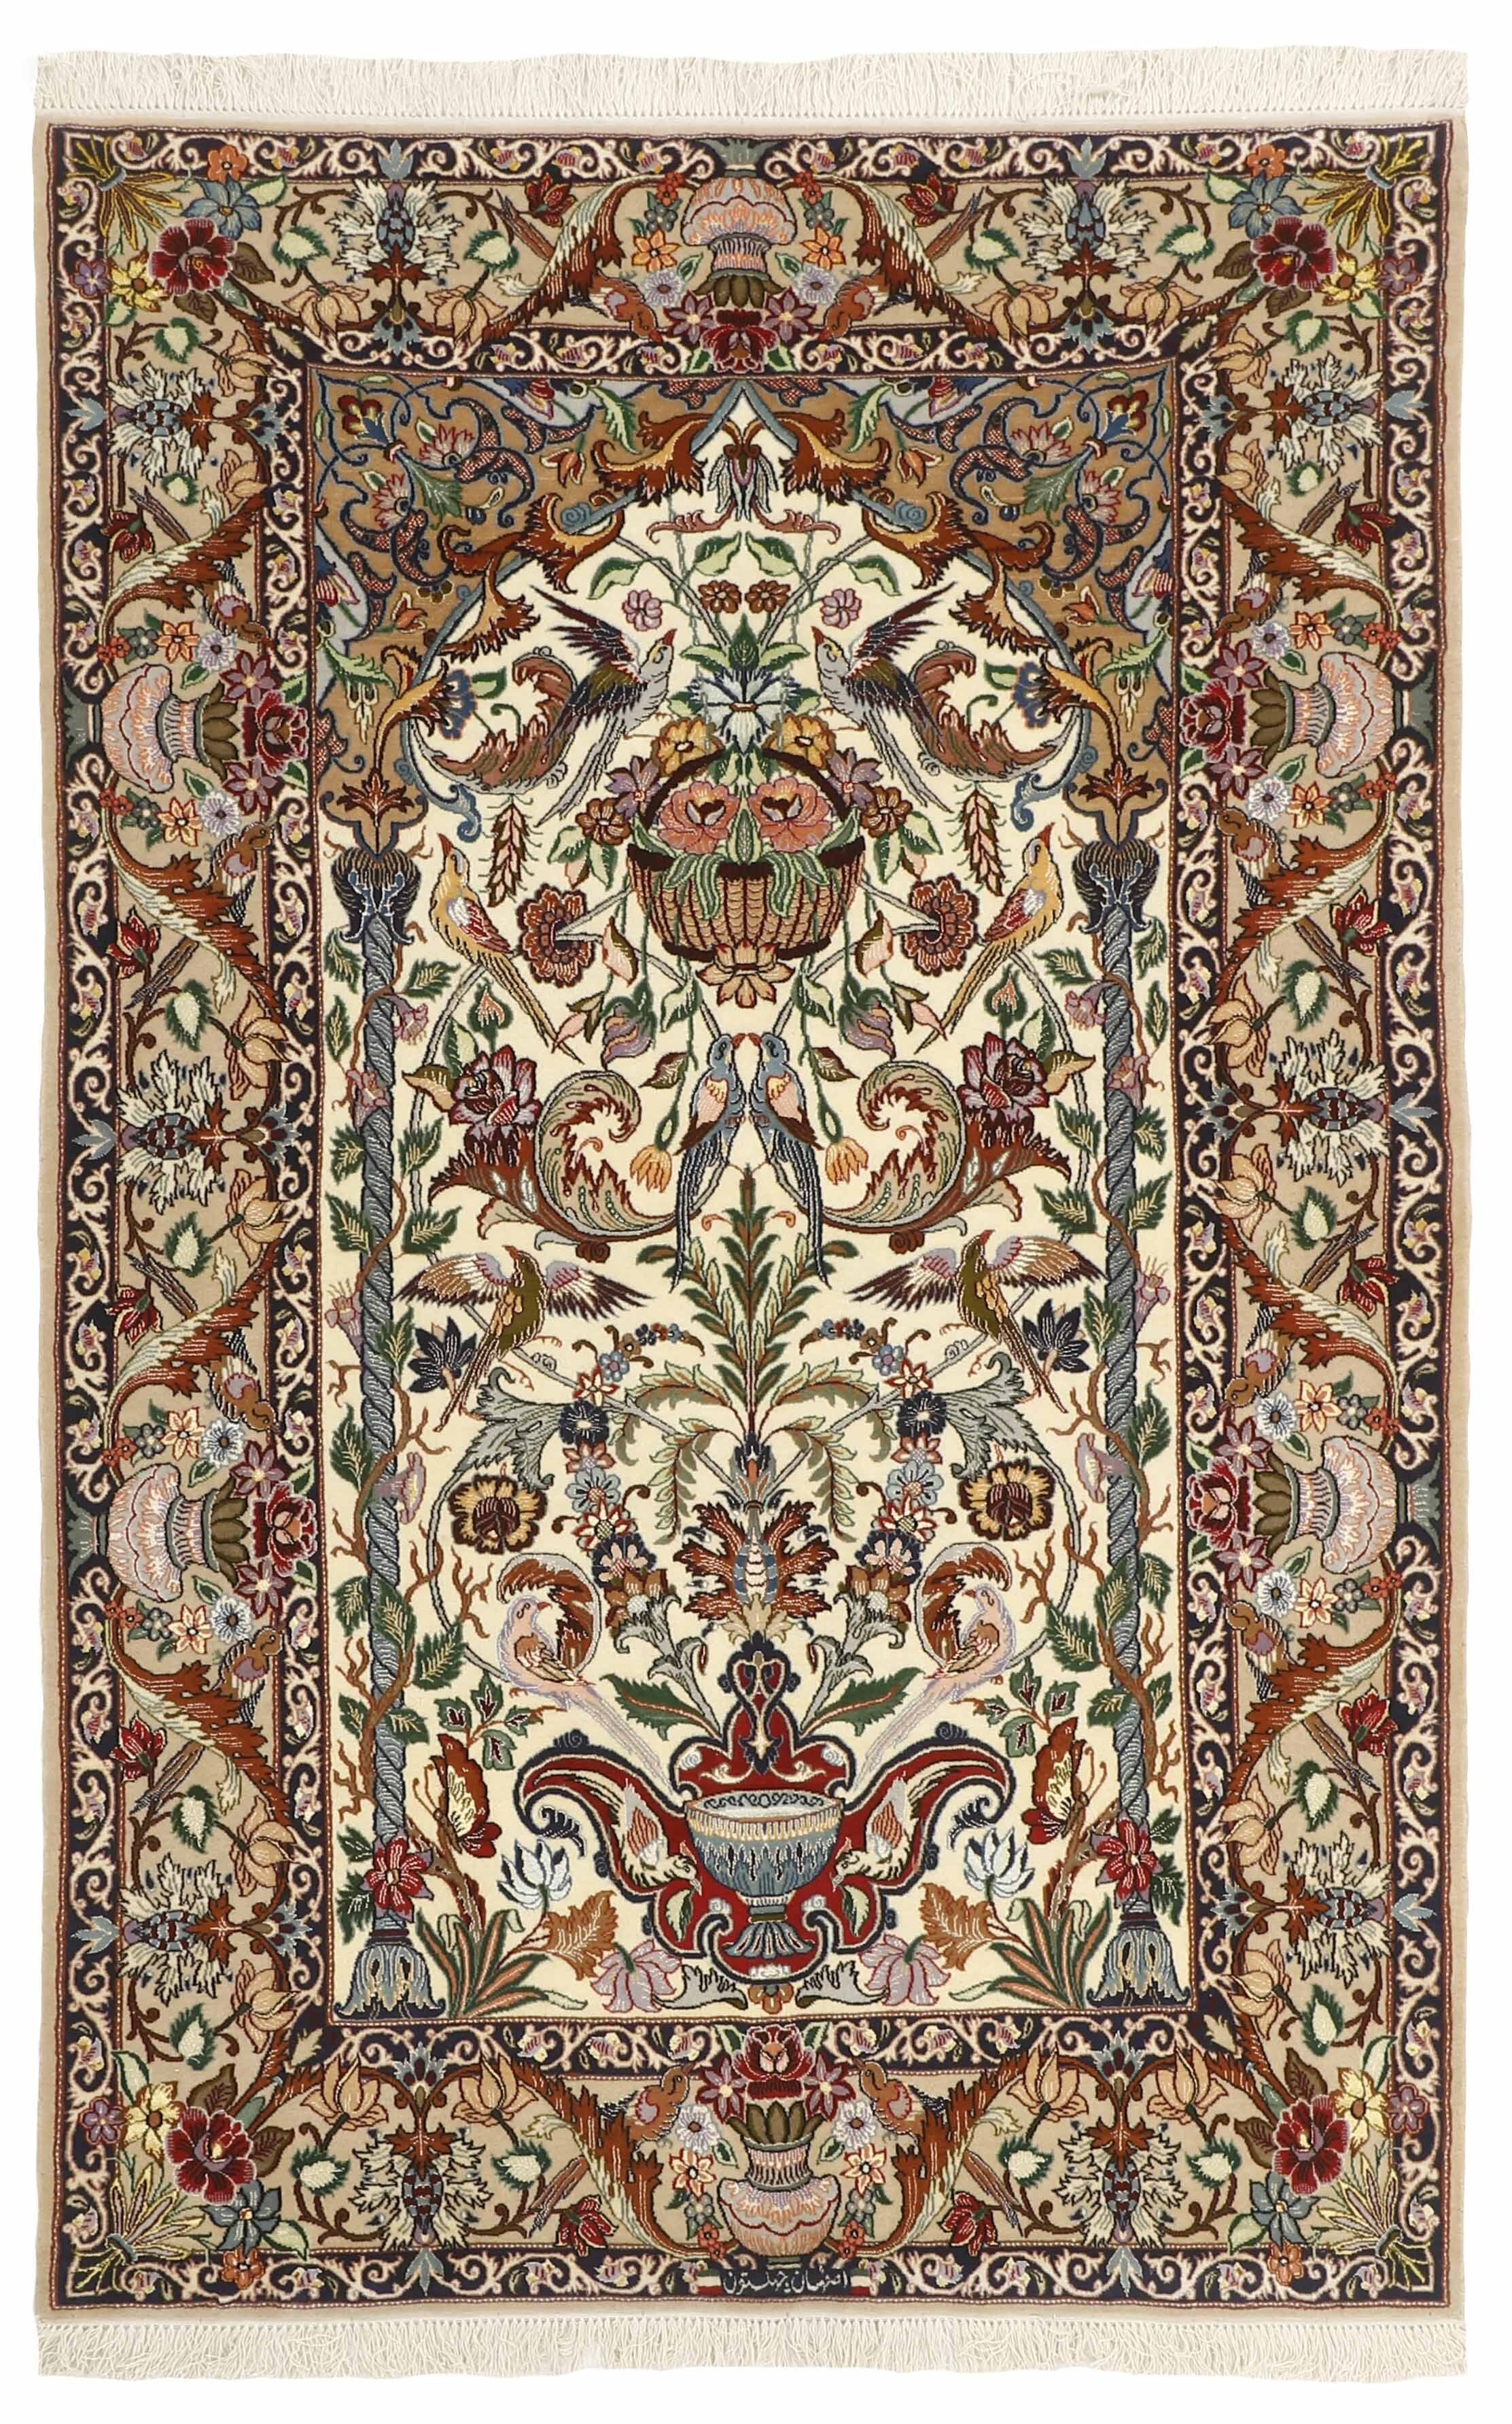 Authentic persian rug with traditional pattern in red, blue, green, beige and brown